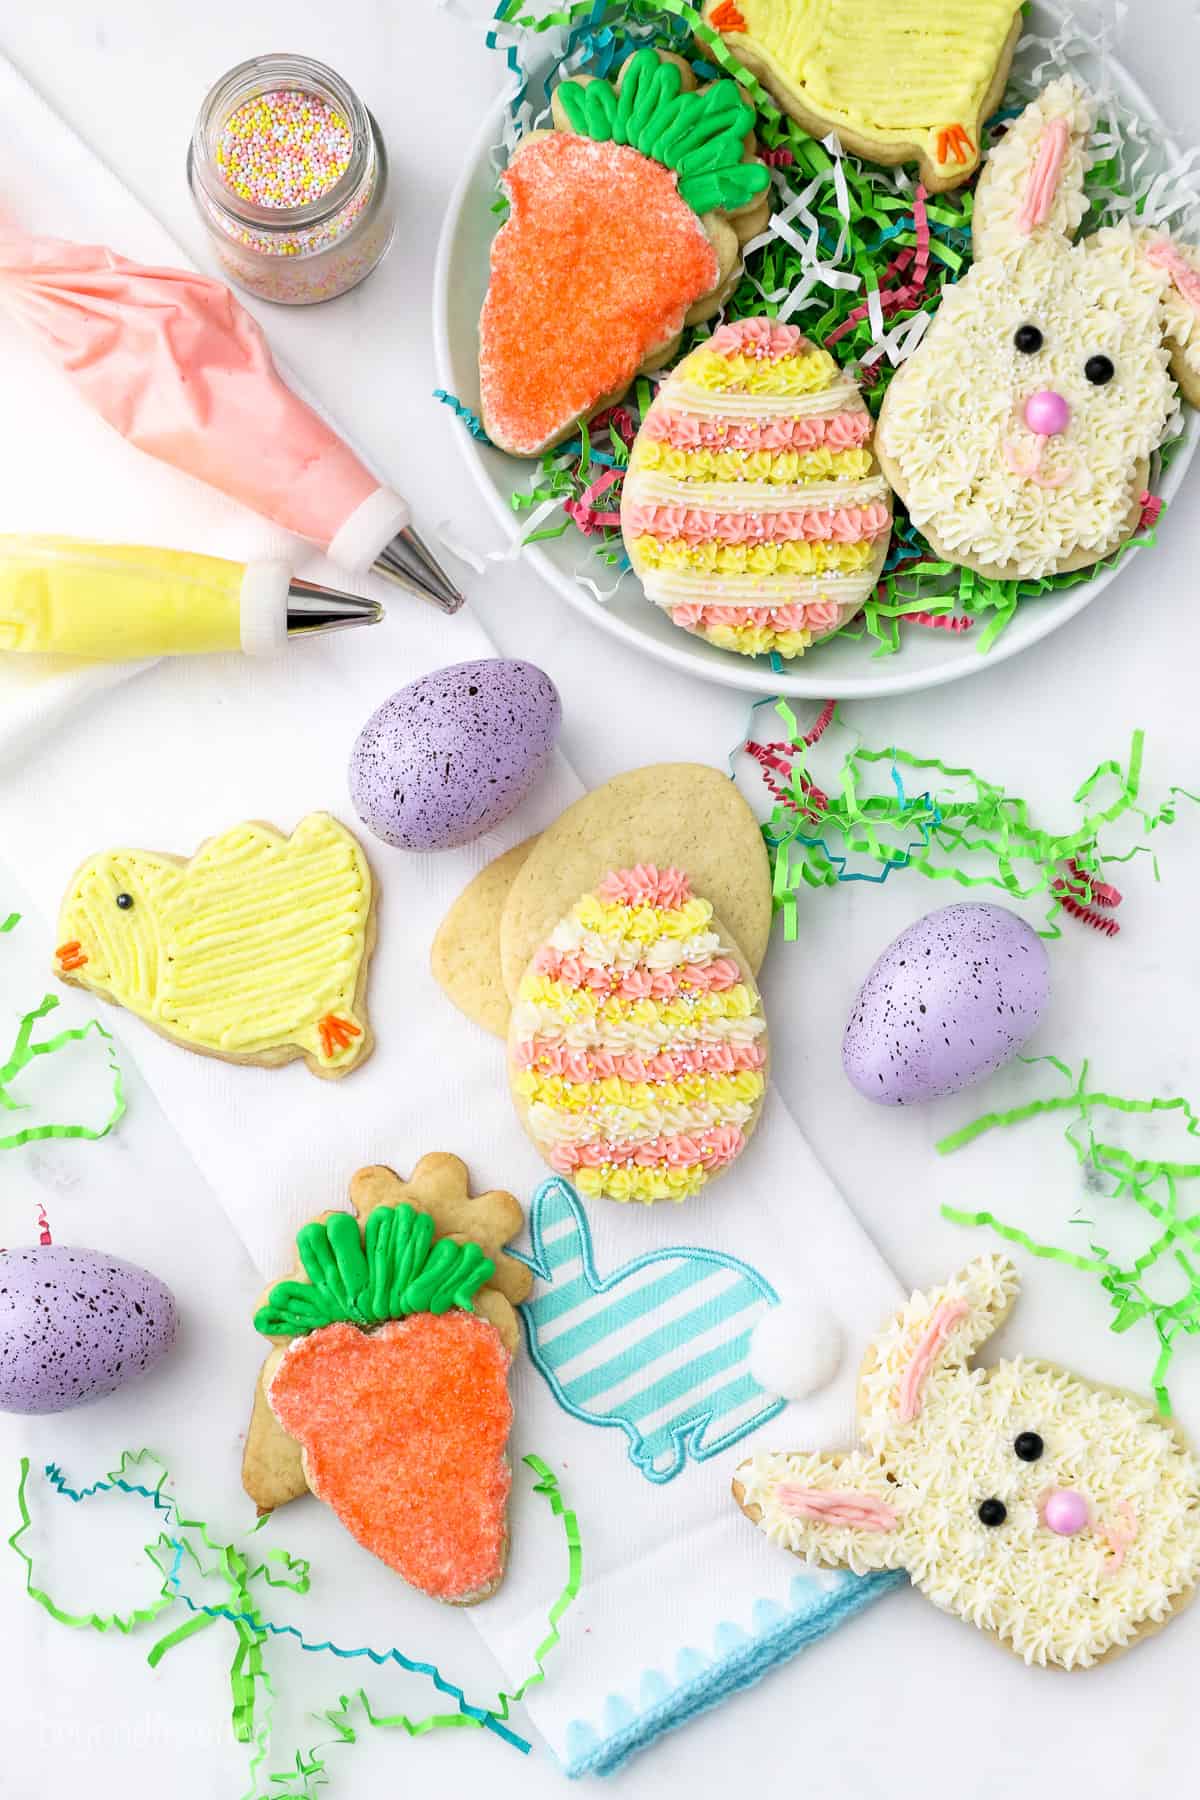 Overhead view of Easter sugar cookies on a plate, next to more assorted Easter cookies scattered on a white countertop next to speckled eggs and decorating tools.